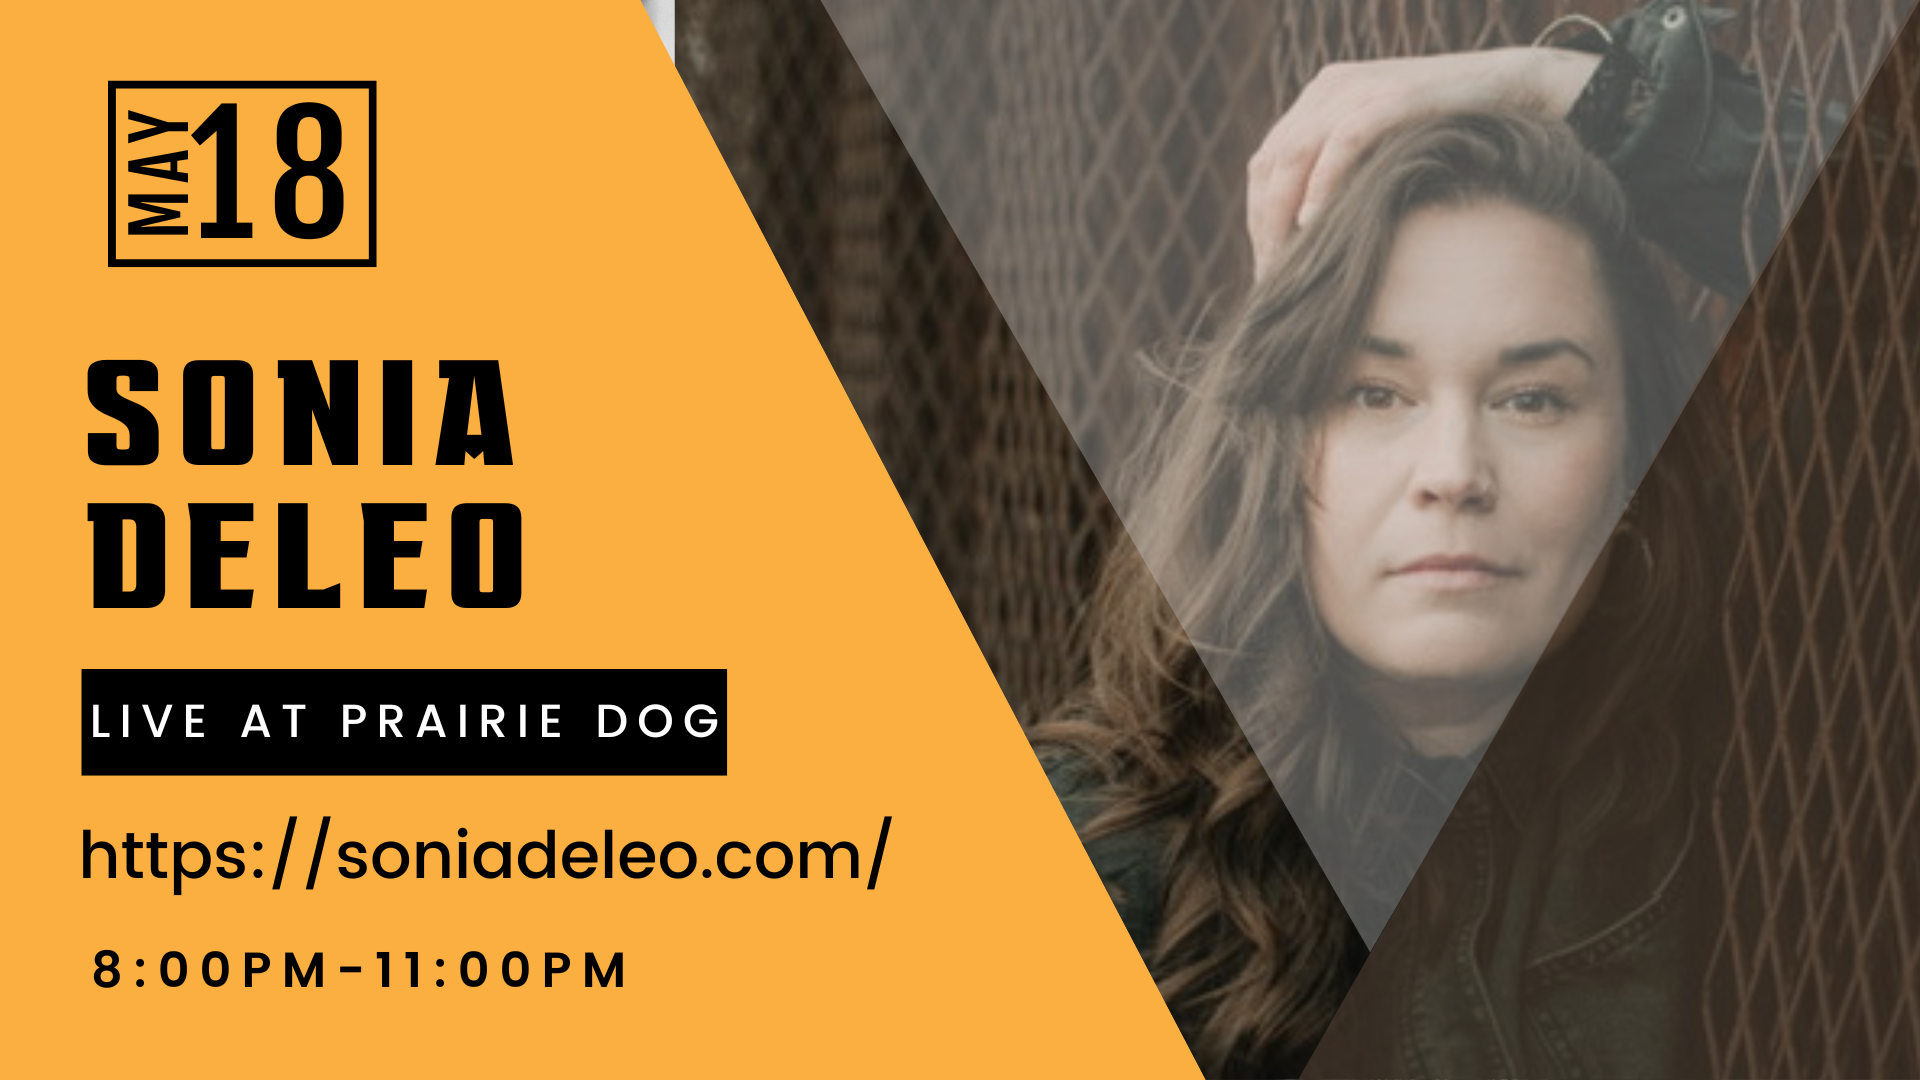 Sonia Deleo sings the house down on Prairie Dog's Stage May 18th